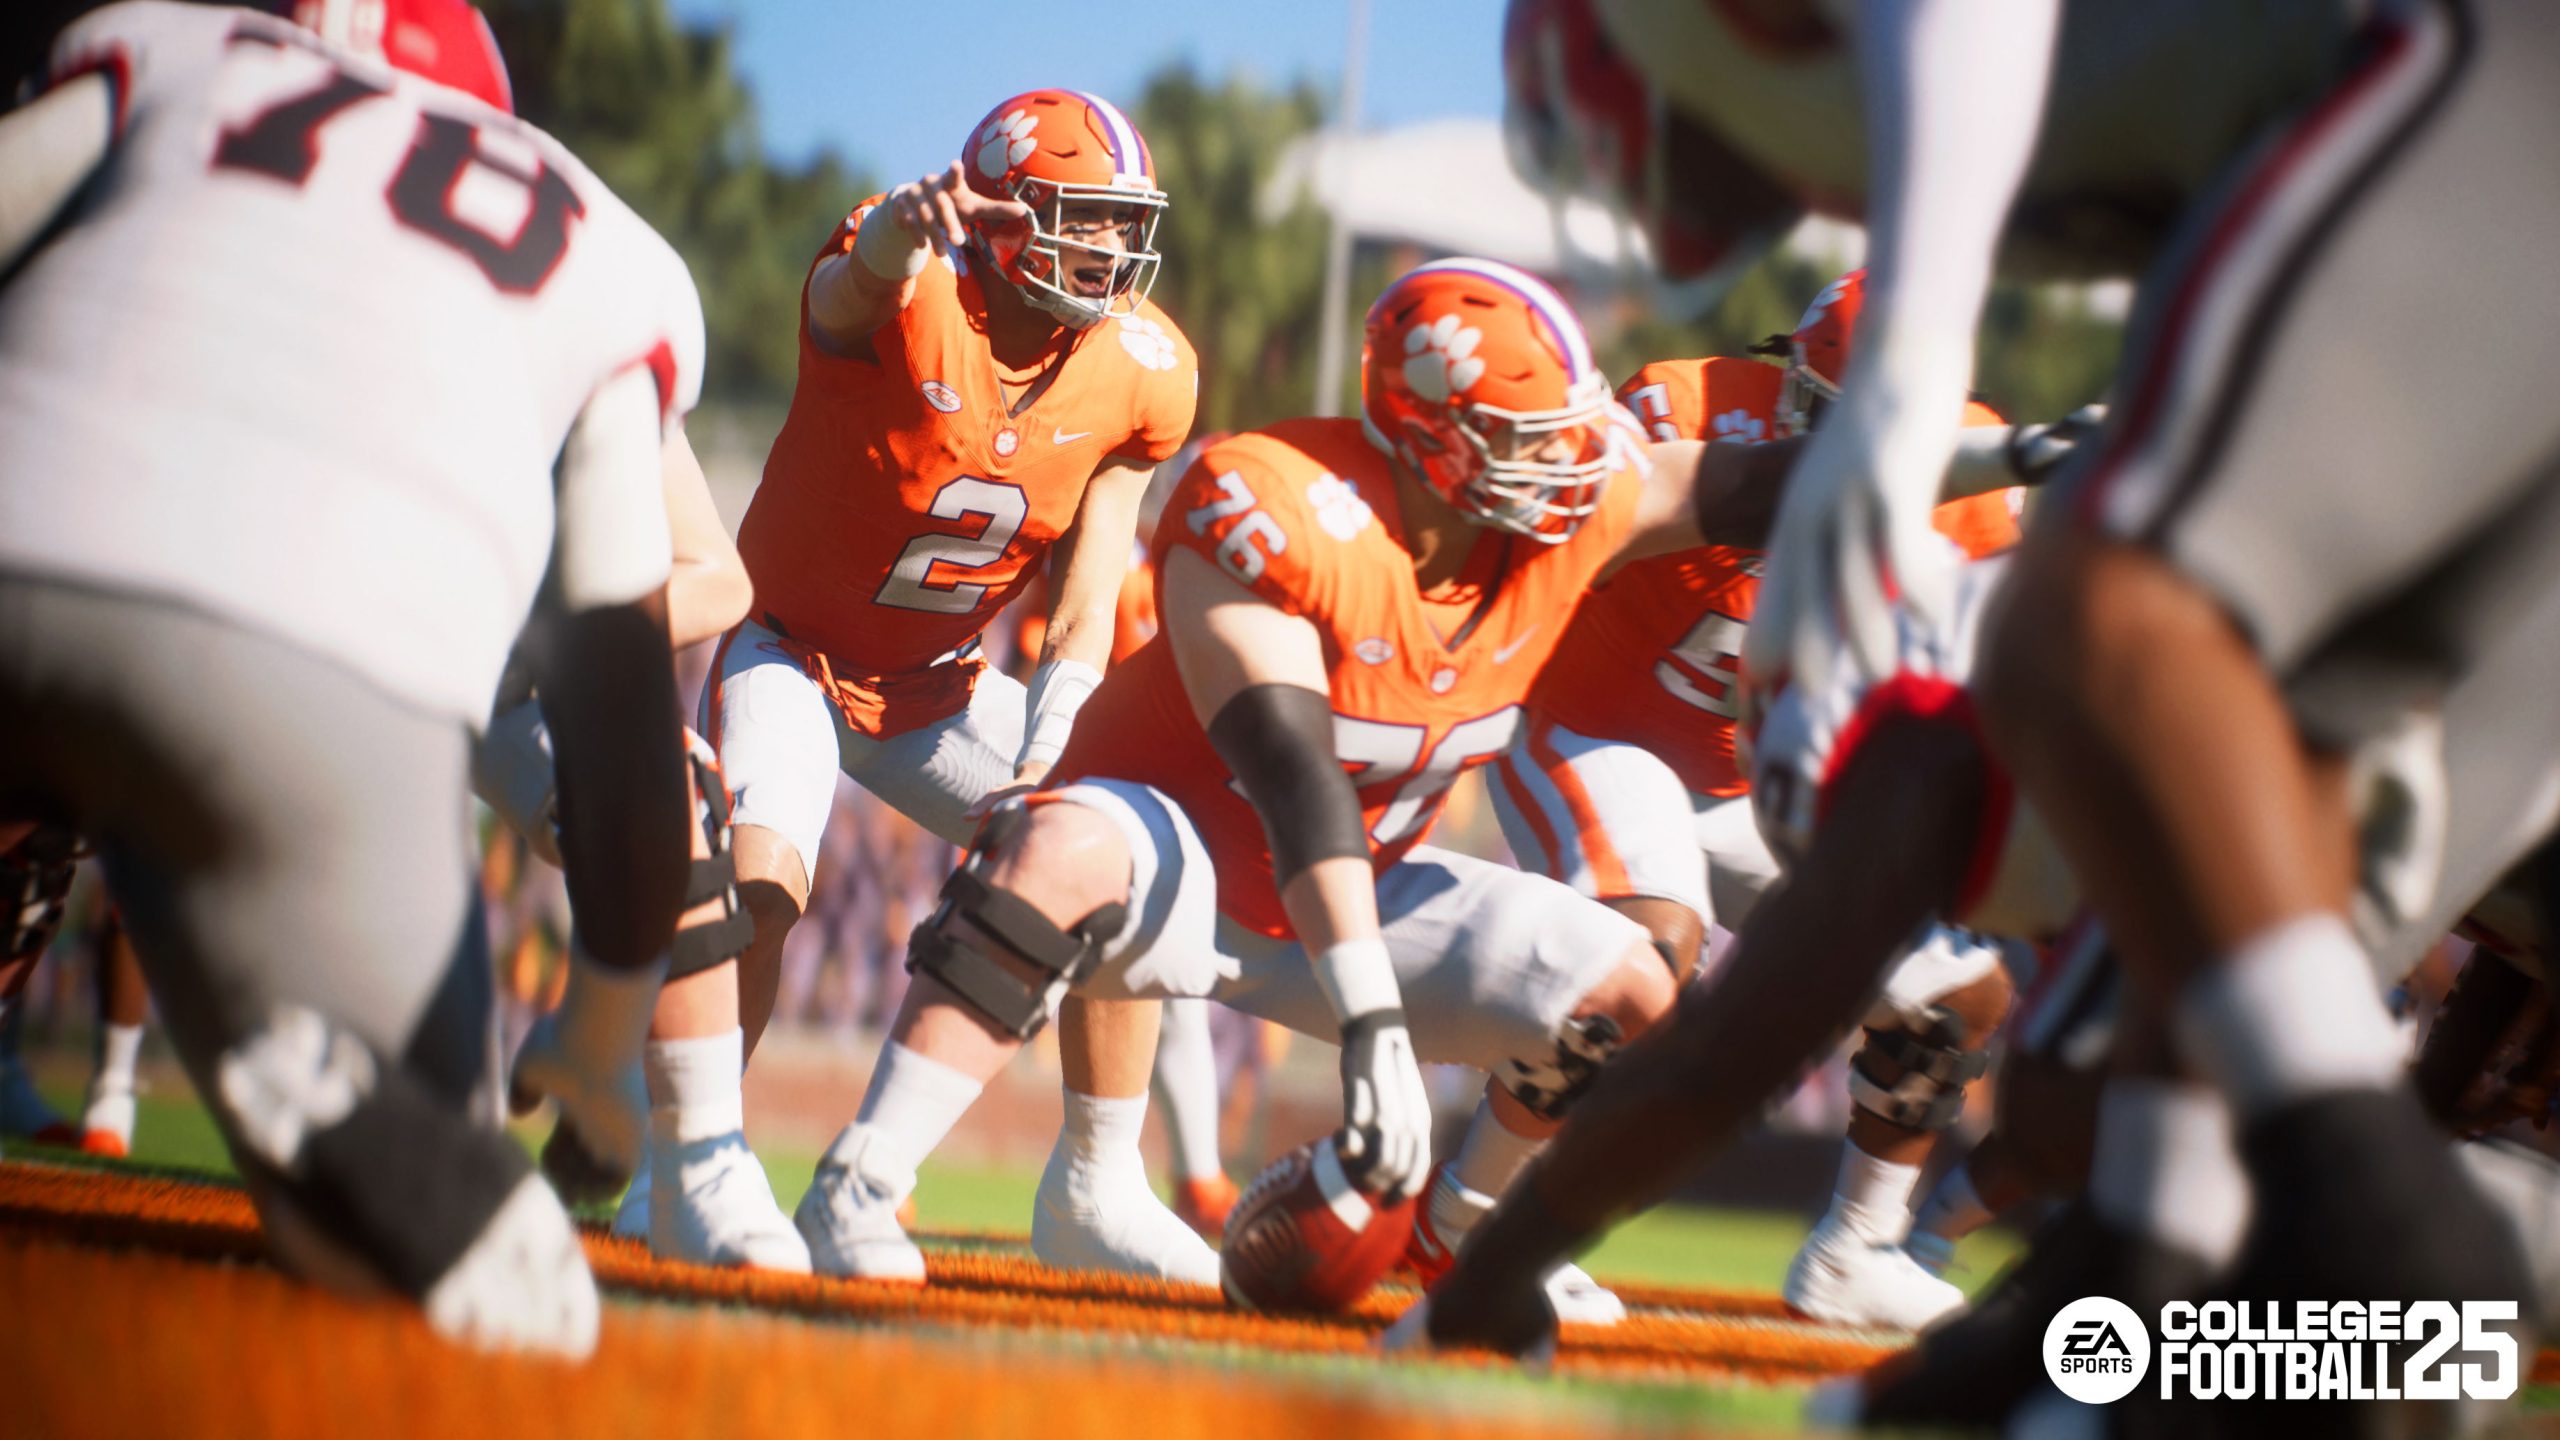 Clemson's center calls out defensive coverage assignments before snapping the ball in EA Sports College Football 25